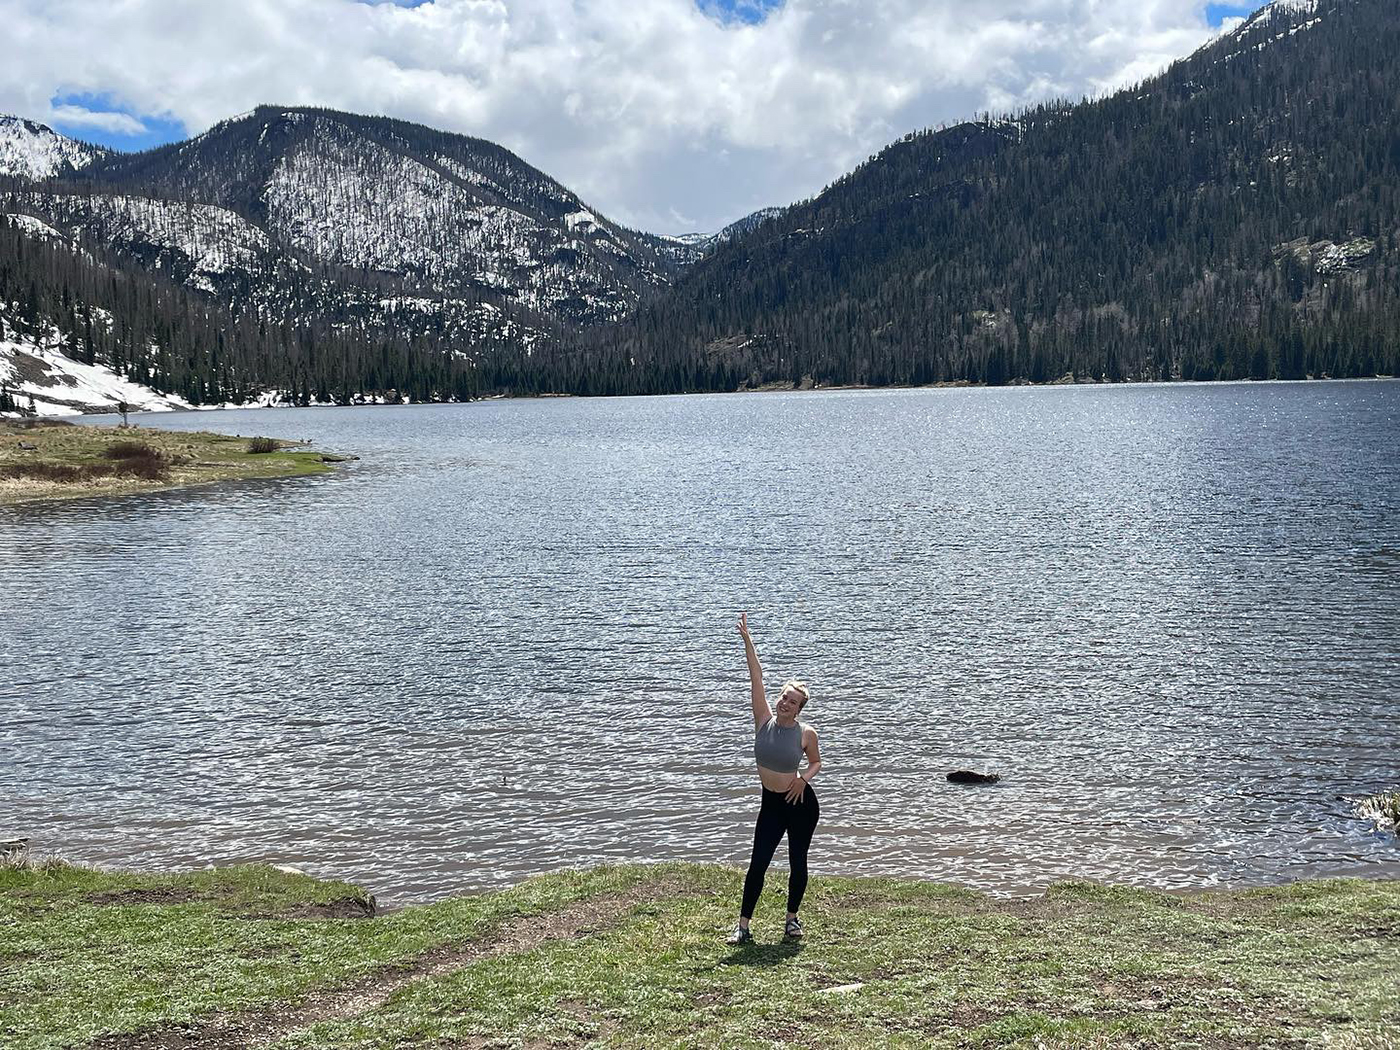 SMU-in-Taos student Ella Collard reaches overhead with one arm in front of a mountain lake in Taos, New Mexico. 